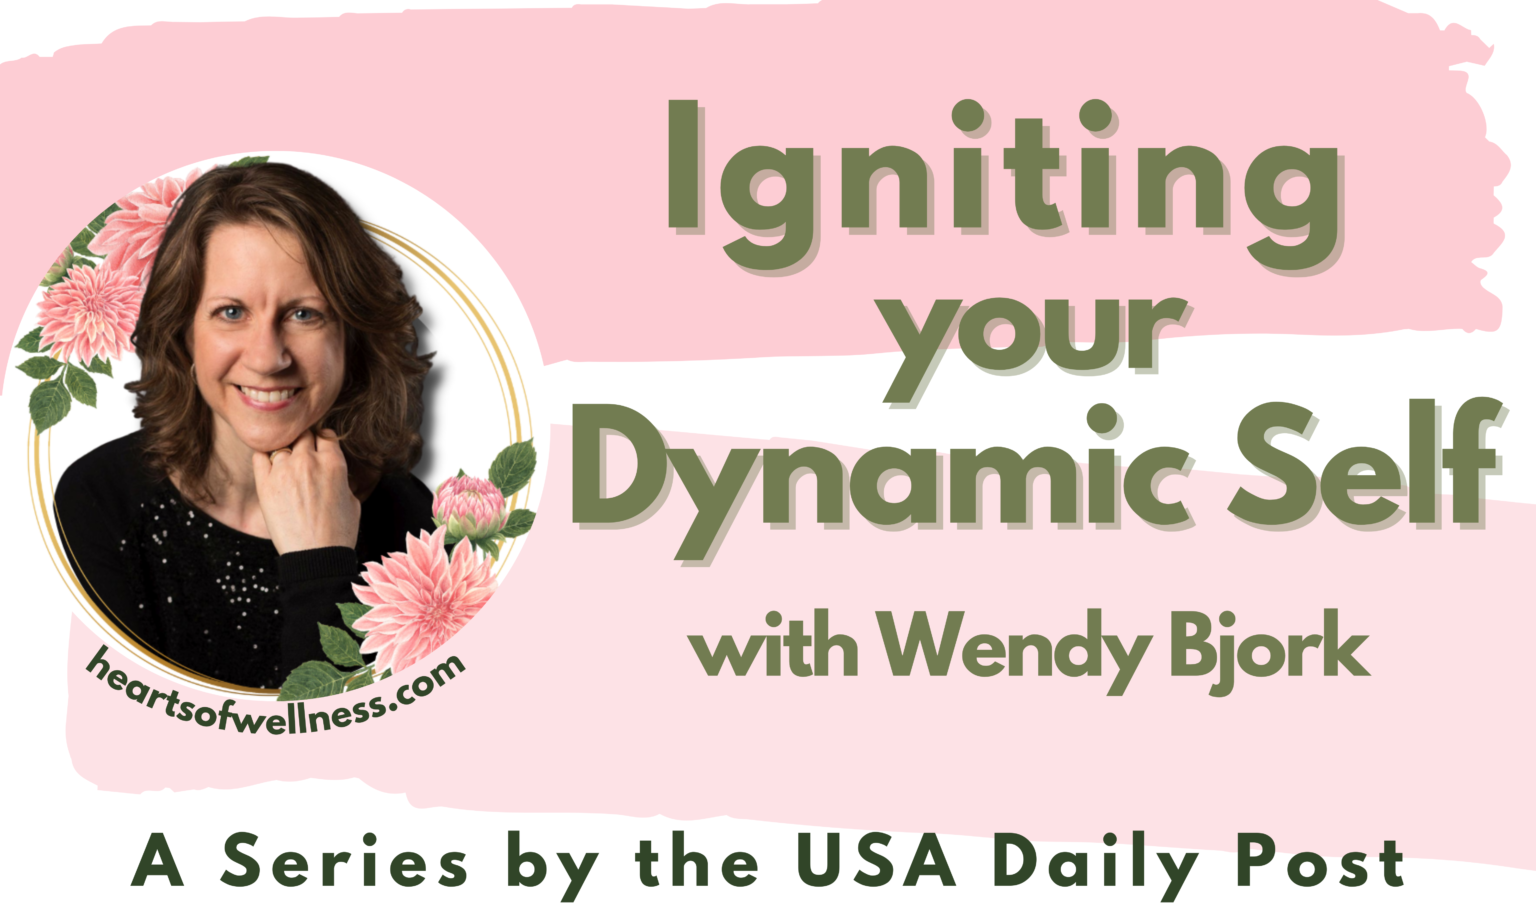 Wendy Bjork Commentaries:  Igniting your Dynamic Self with Wendy Bjork